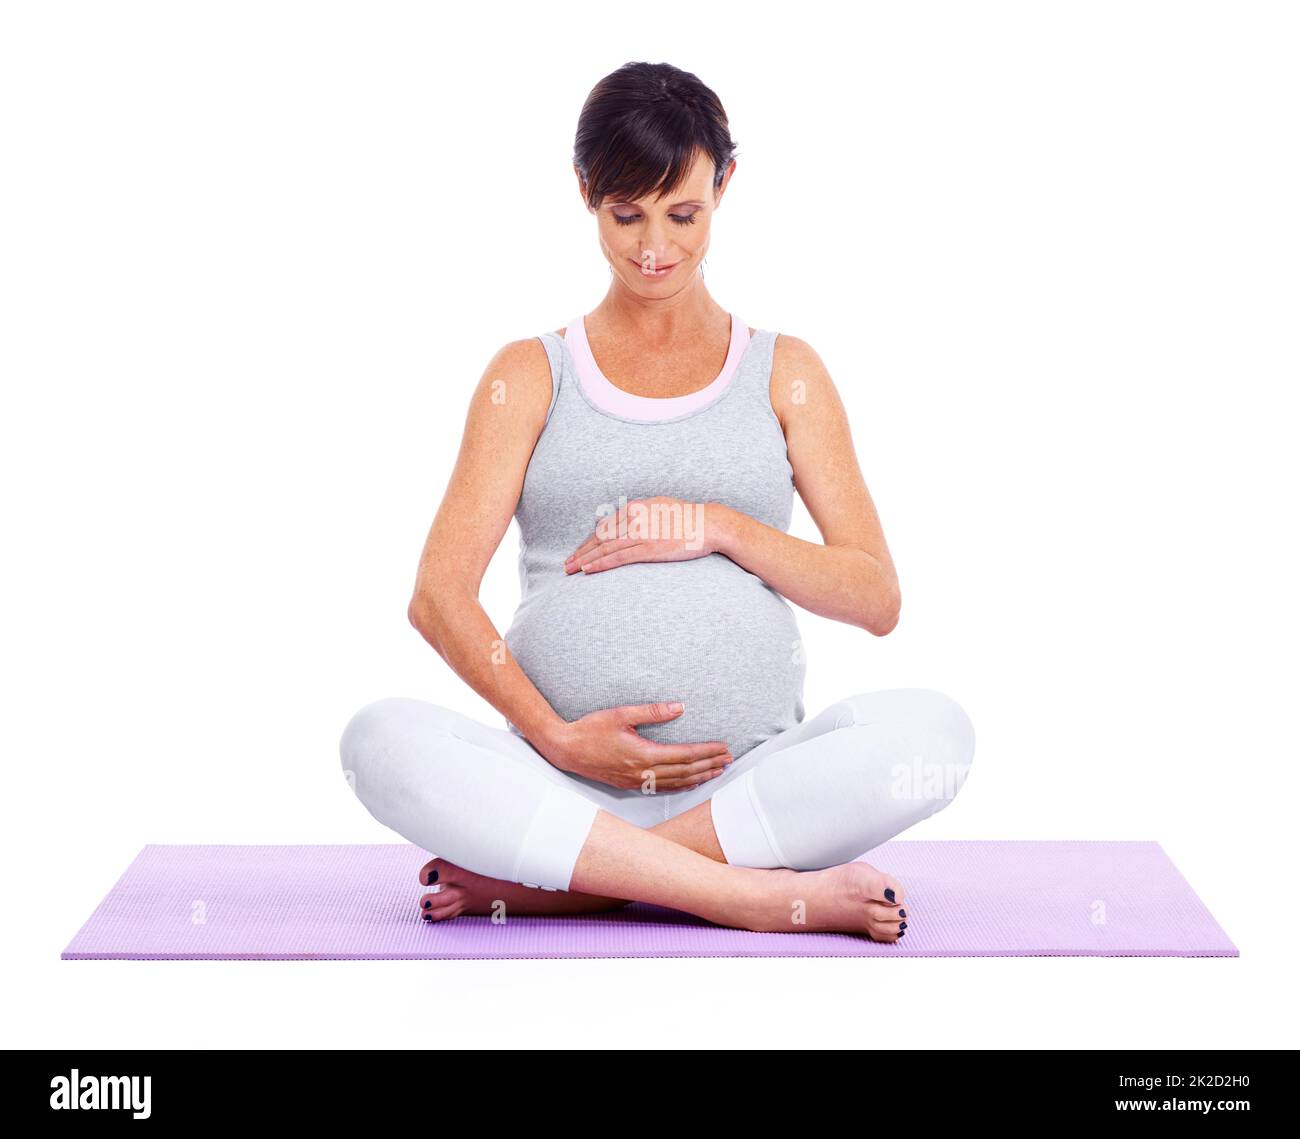 Calm and tranquility for mom and baby. A young expectant mother meditating peacefully while isolated on white. Stock Photo